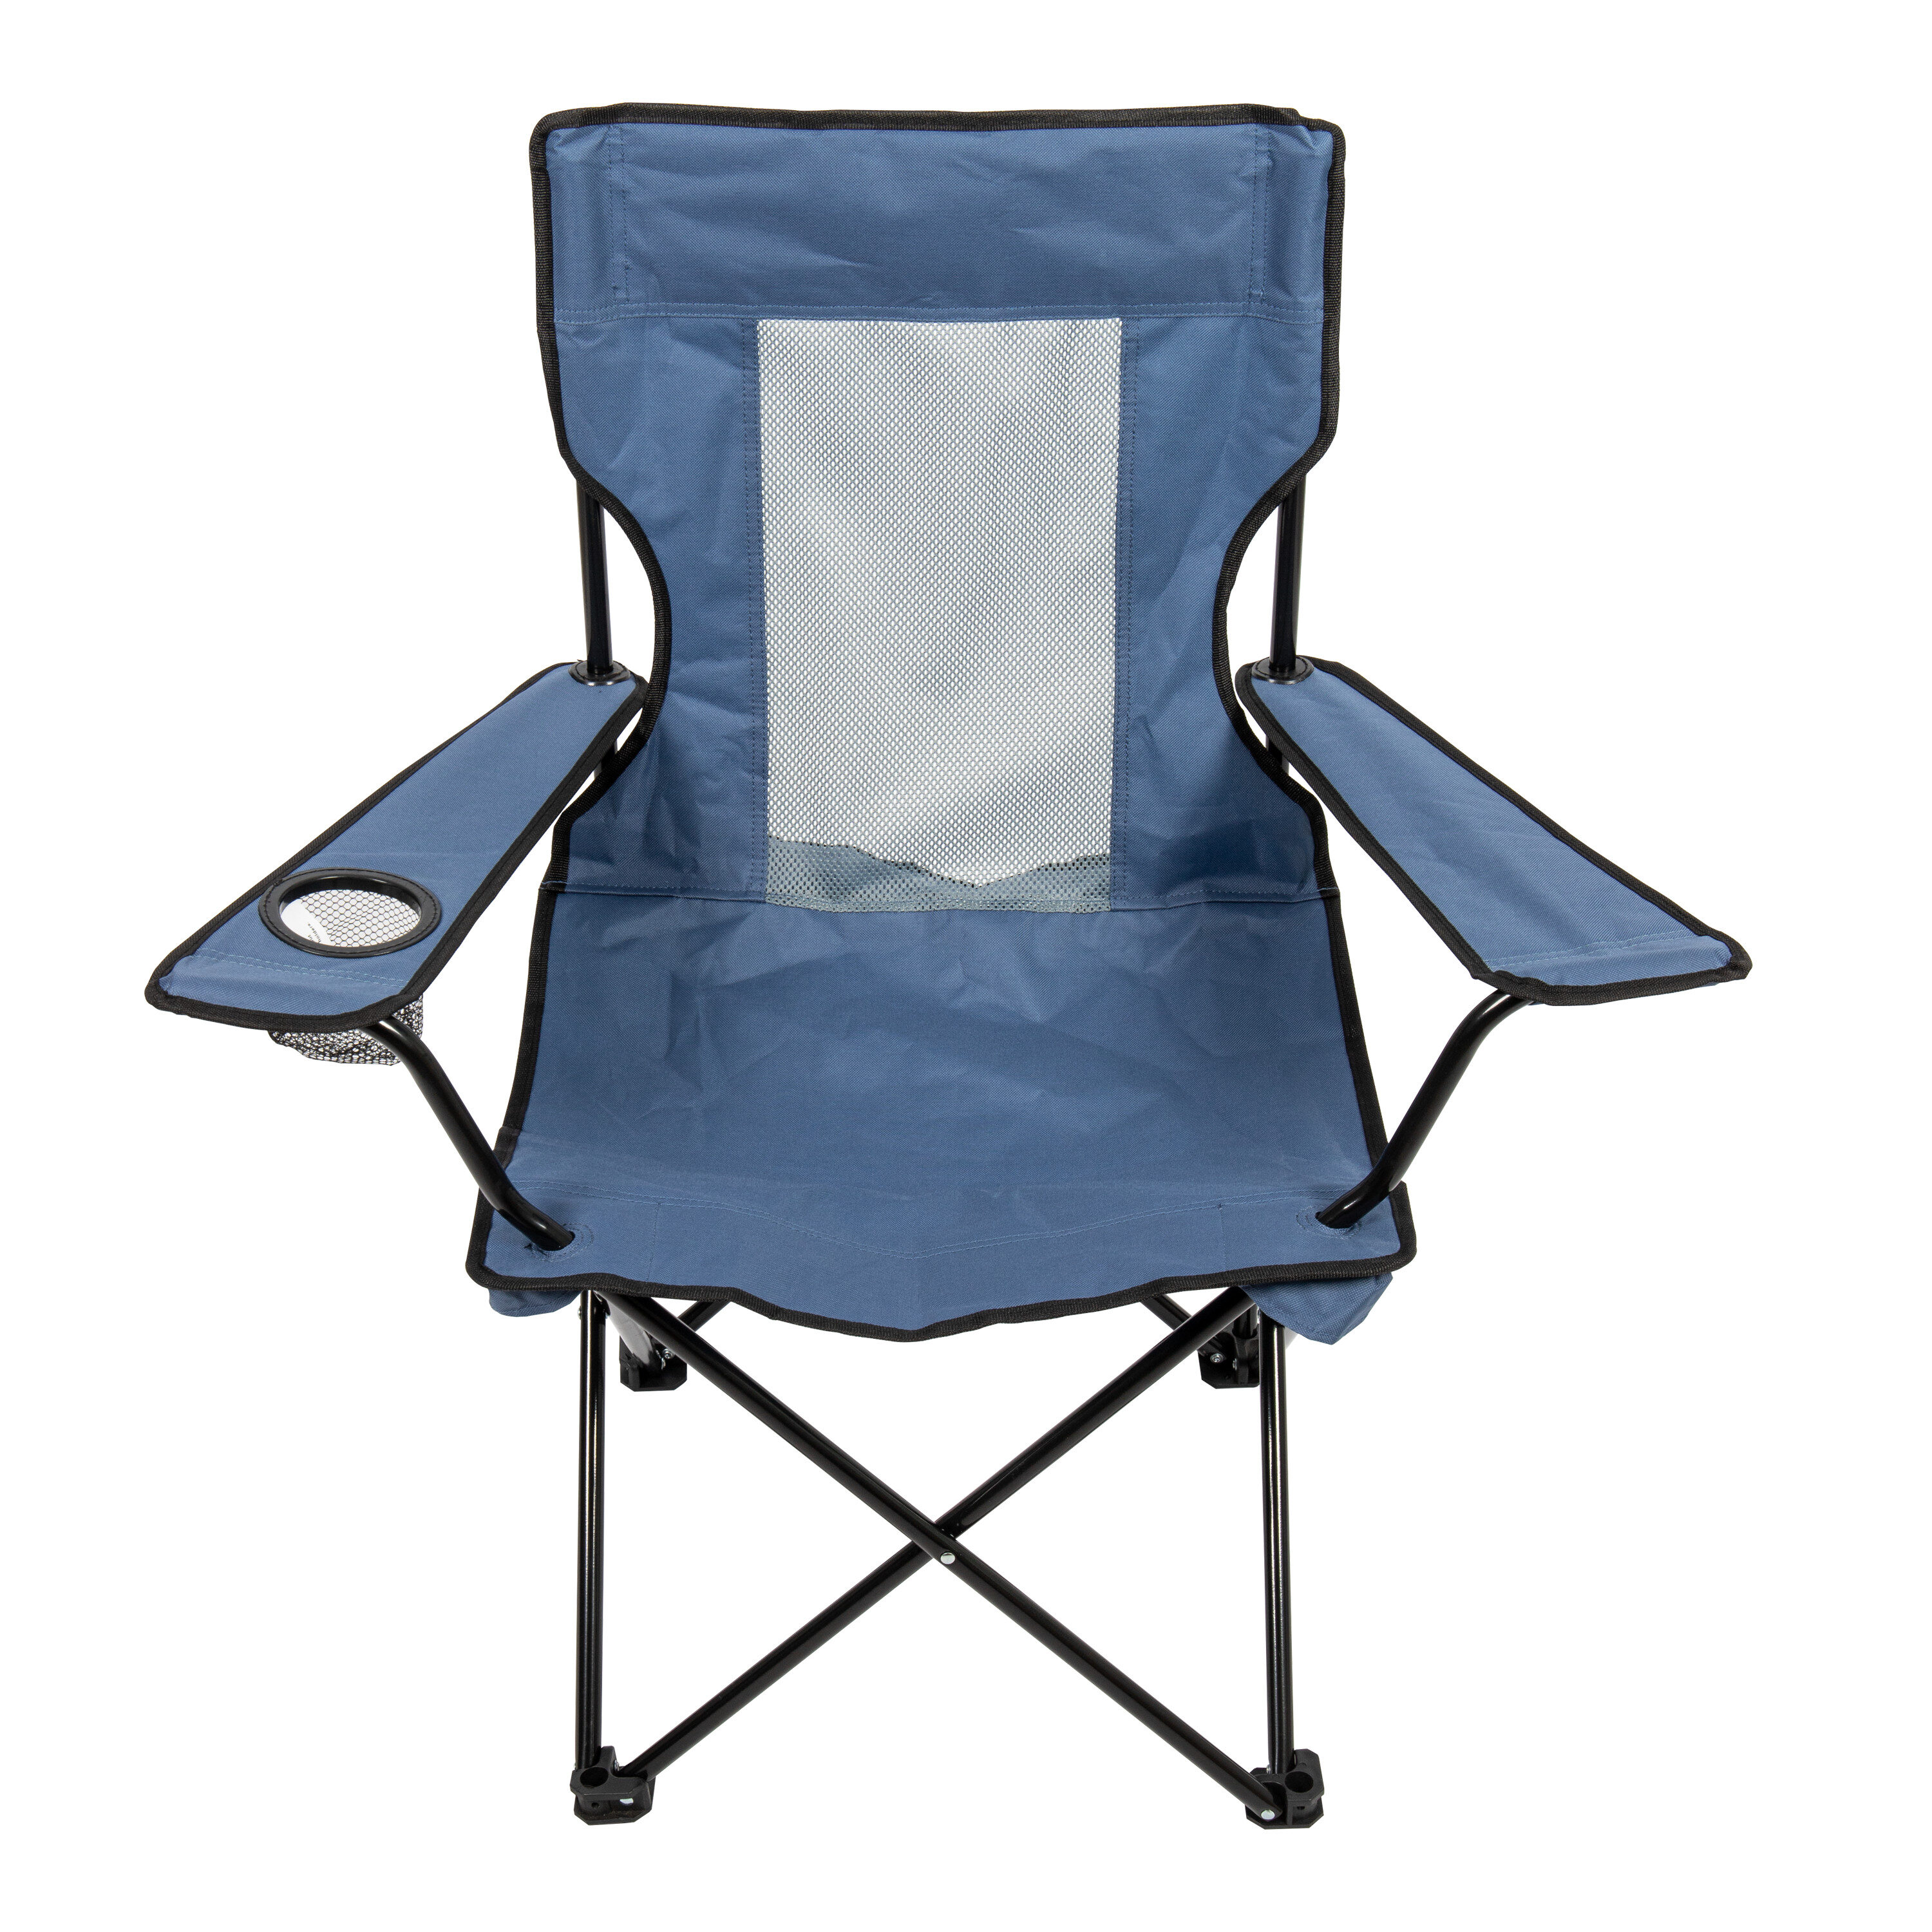 Camp & Go Mesh Back Quad Camping Chair, Size: 2.8' x 2.5' x 3.0